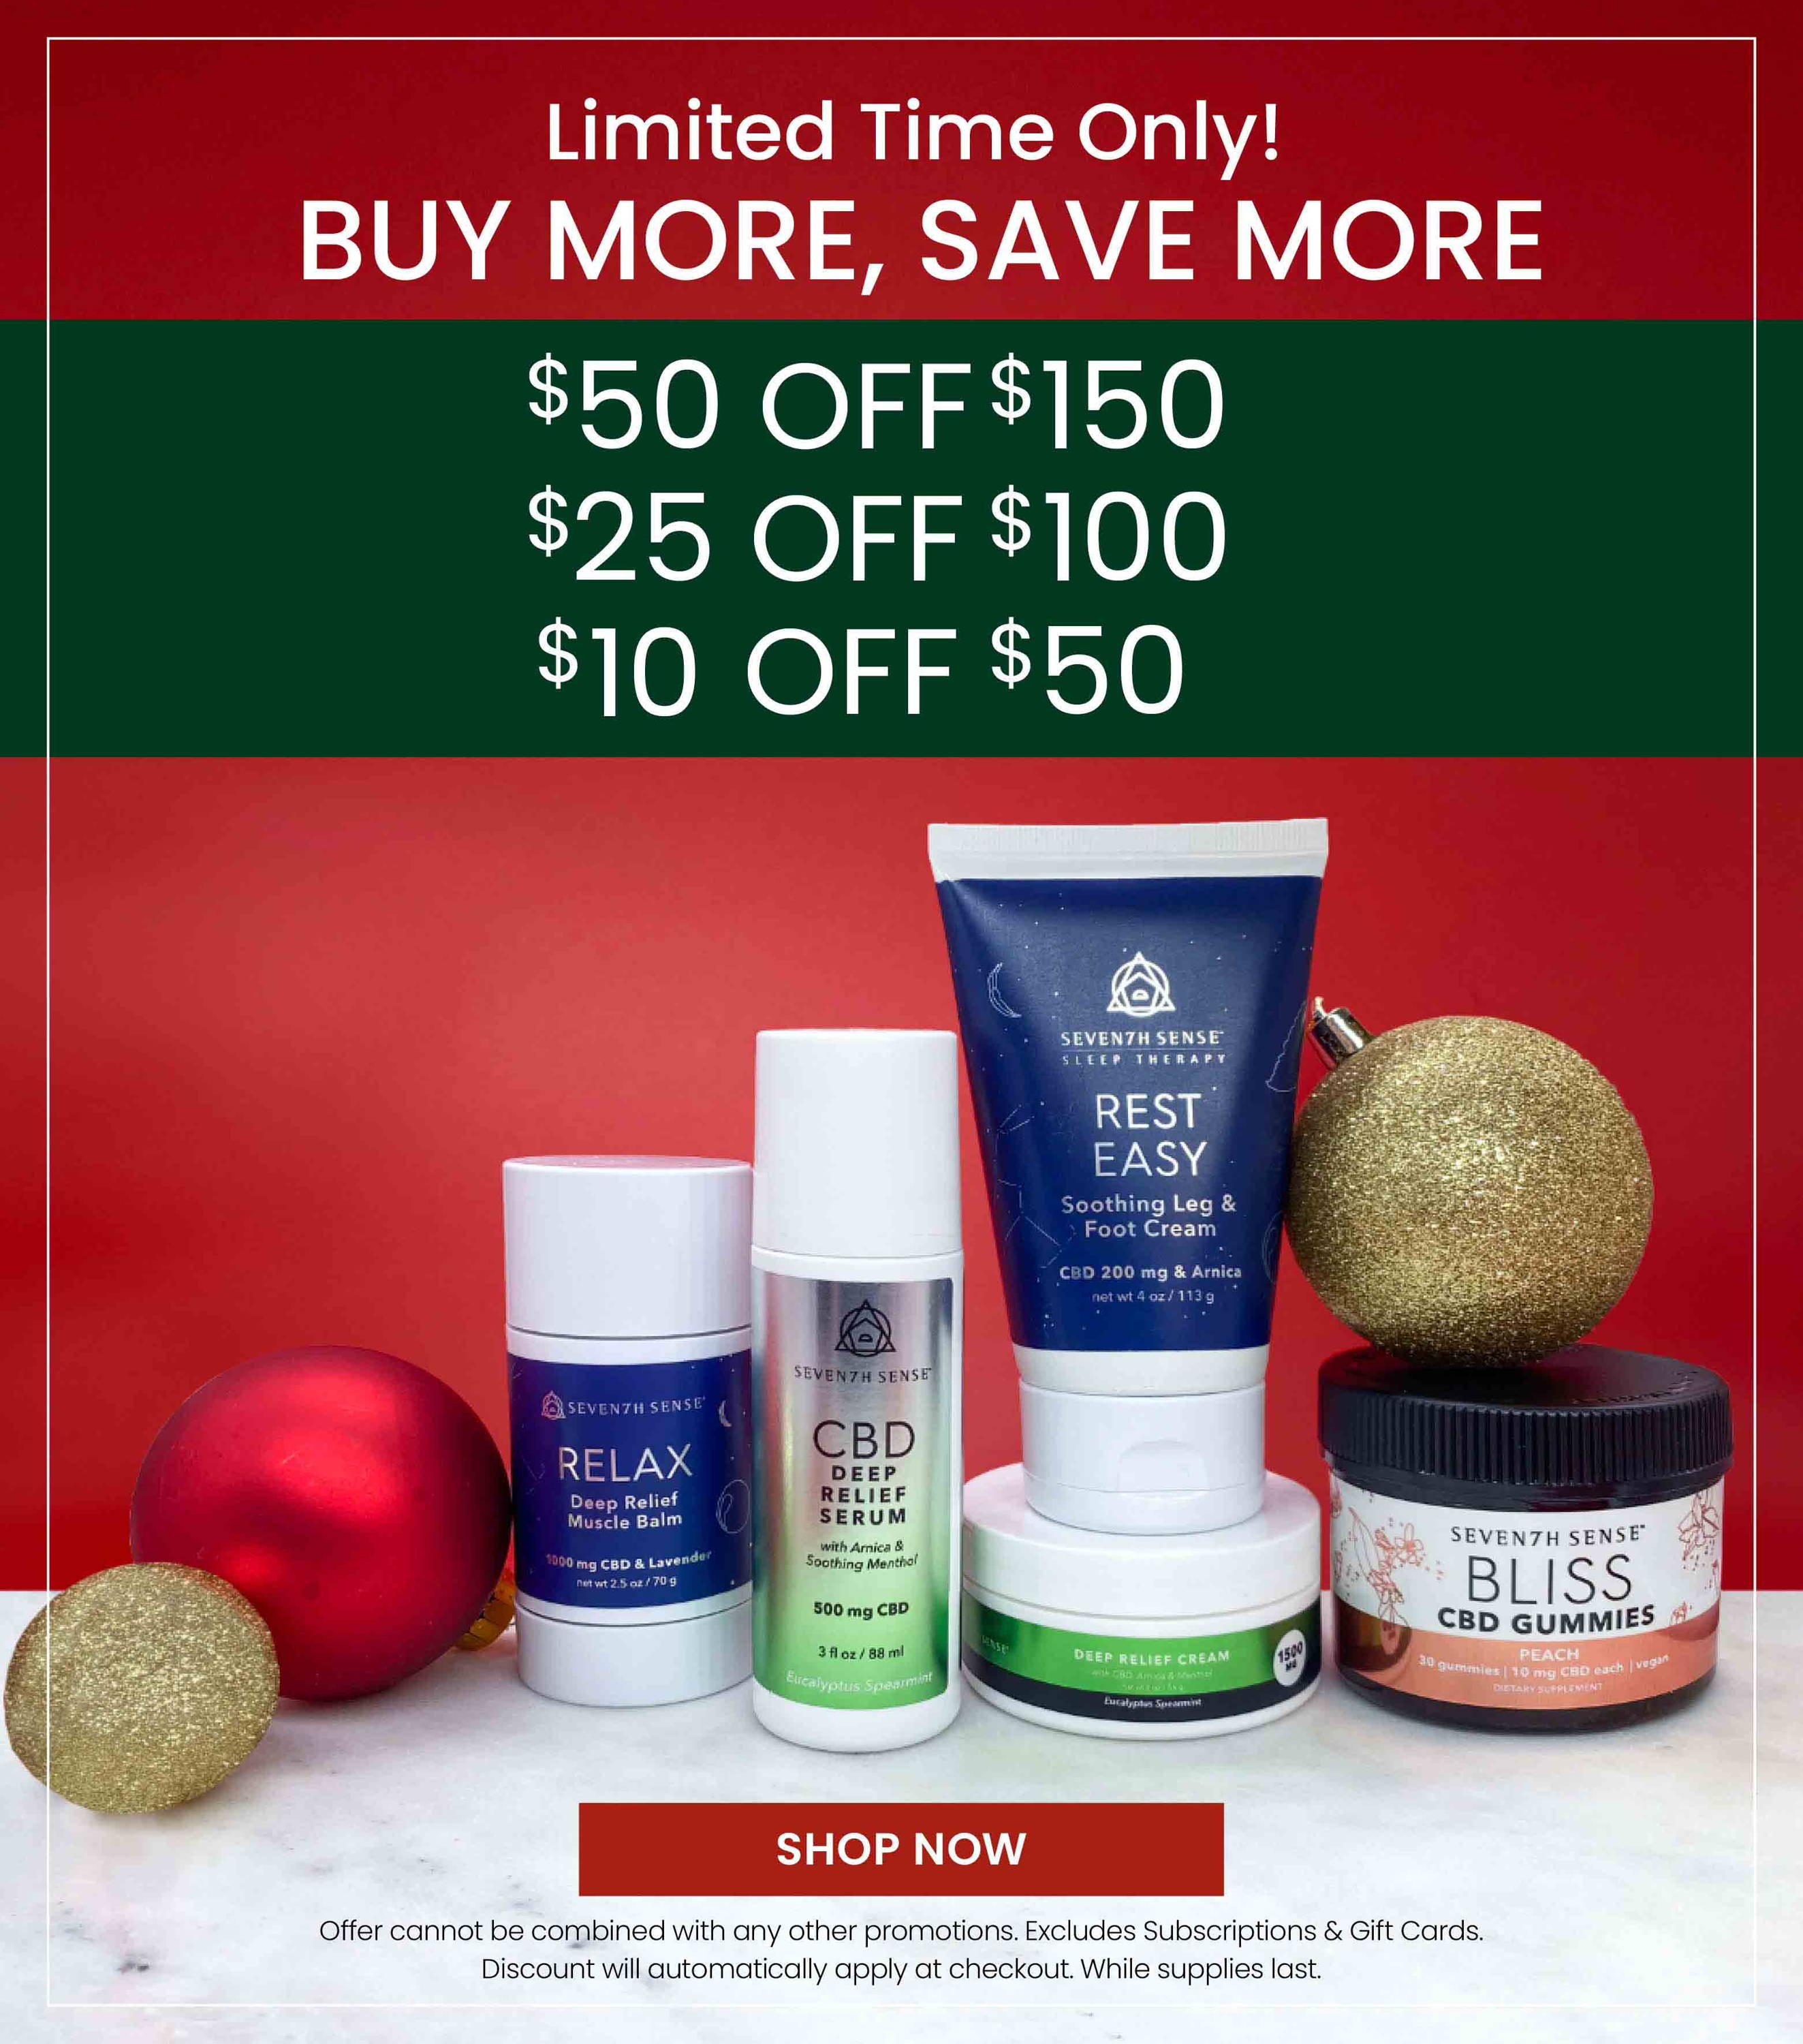 Buy More, Save More! $50 off $150, $25 off $100, $10 off $50. Shop Now.